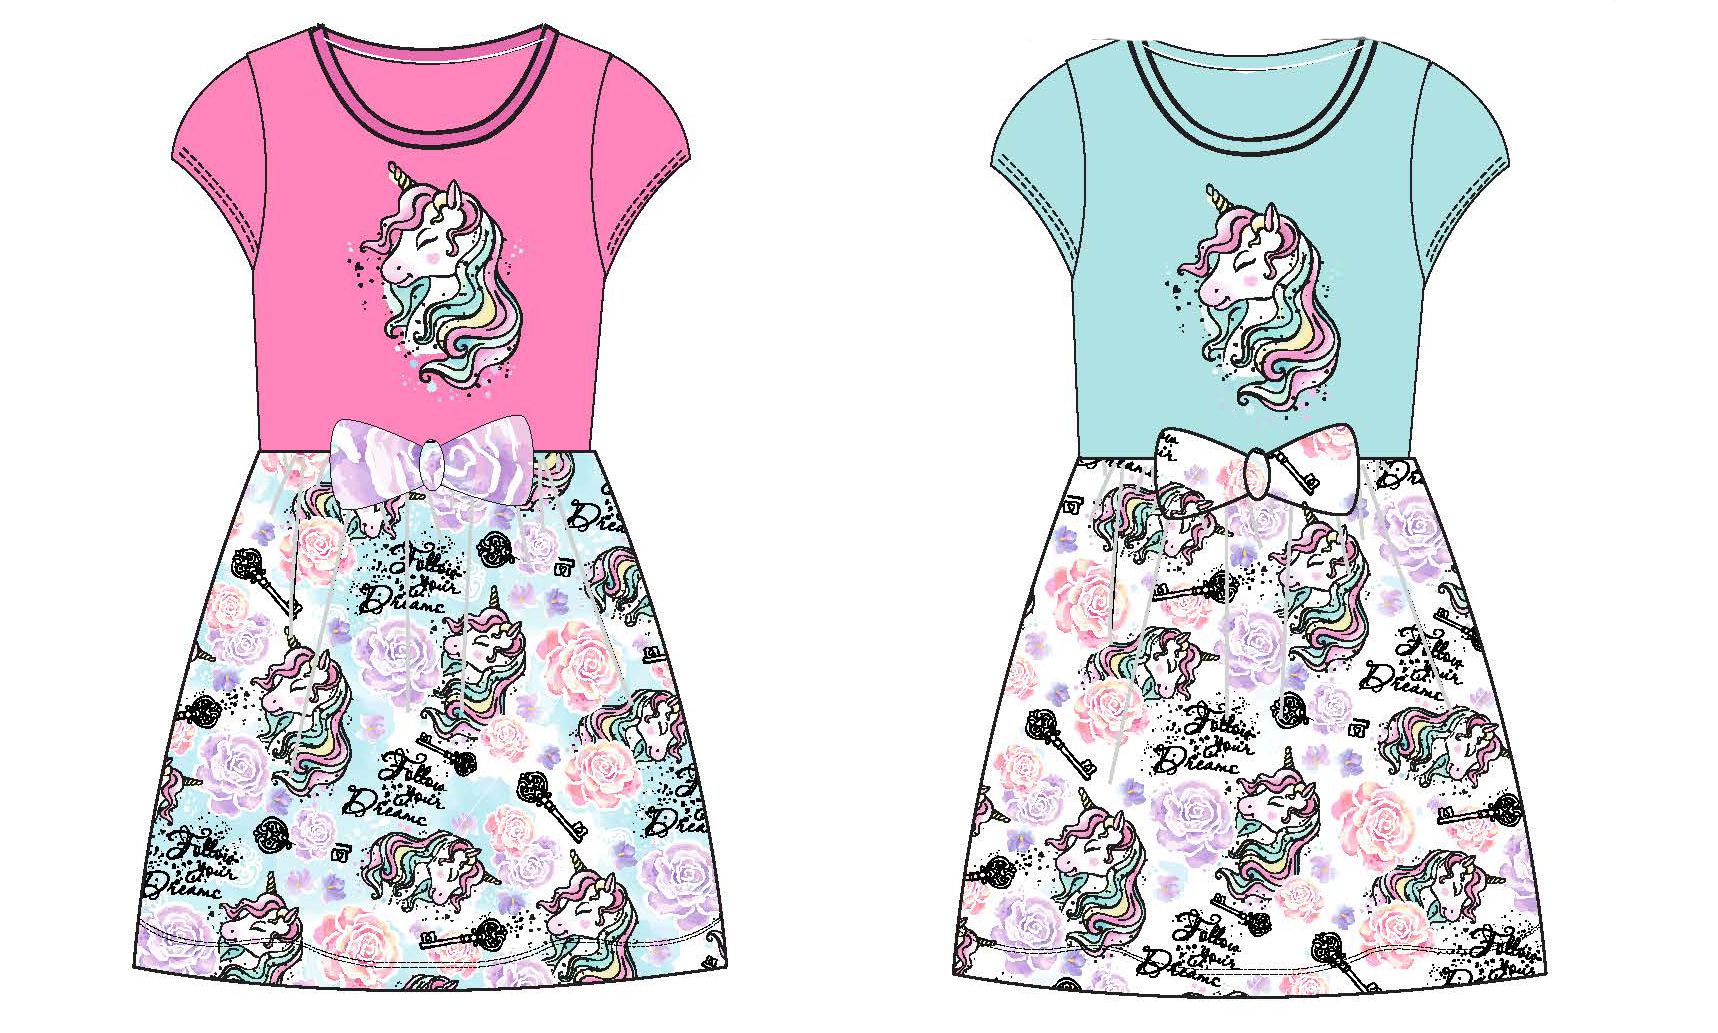 Girl's Short-Sleeved Knit Shirtwaist DRESS w/ Embroidered Bow - Magical Unicorn Print - Size 4-6X